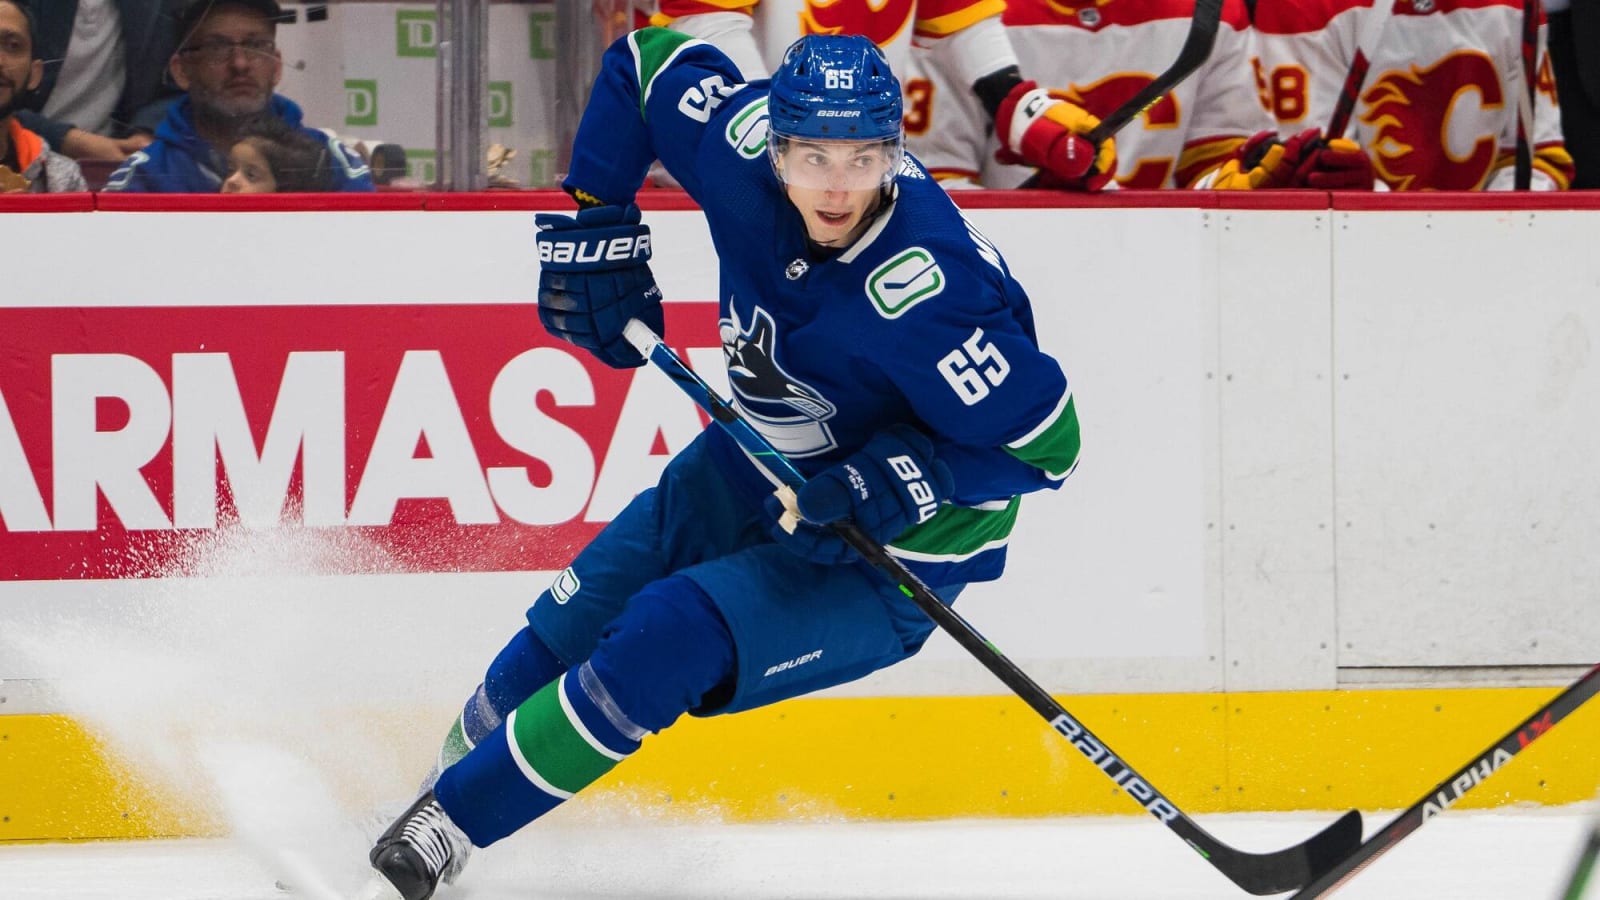 Canucks F Ilya Mikheyev skates for first time since January, expects to be ready for 2023-24 season